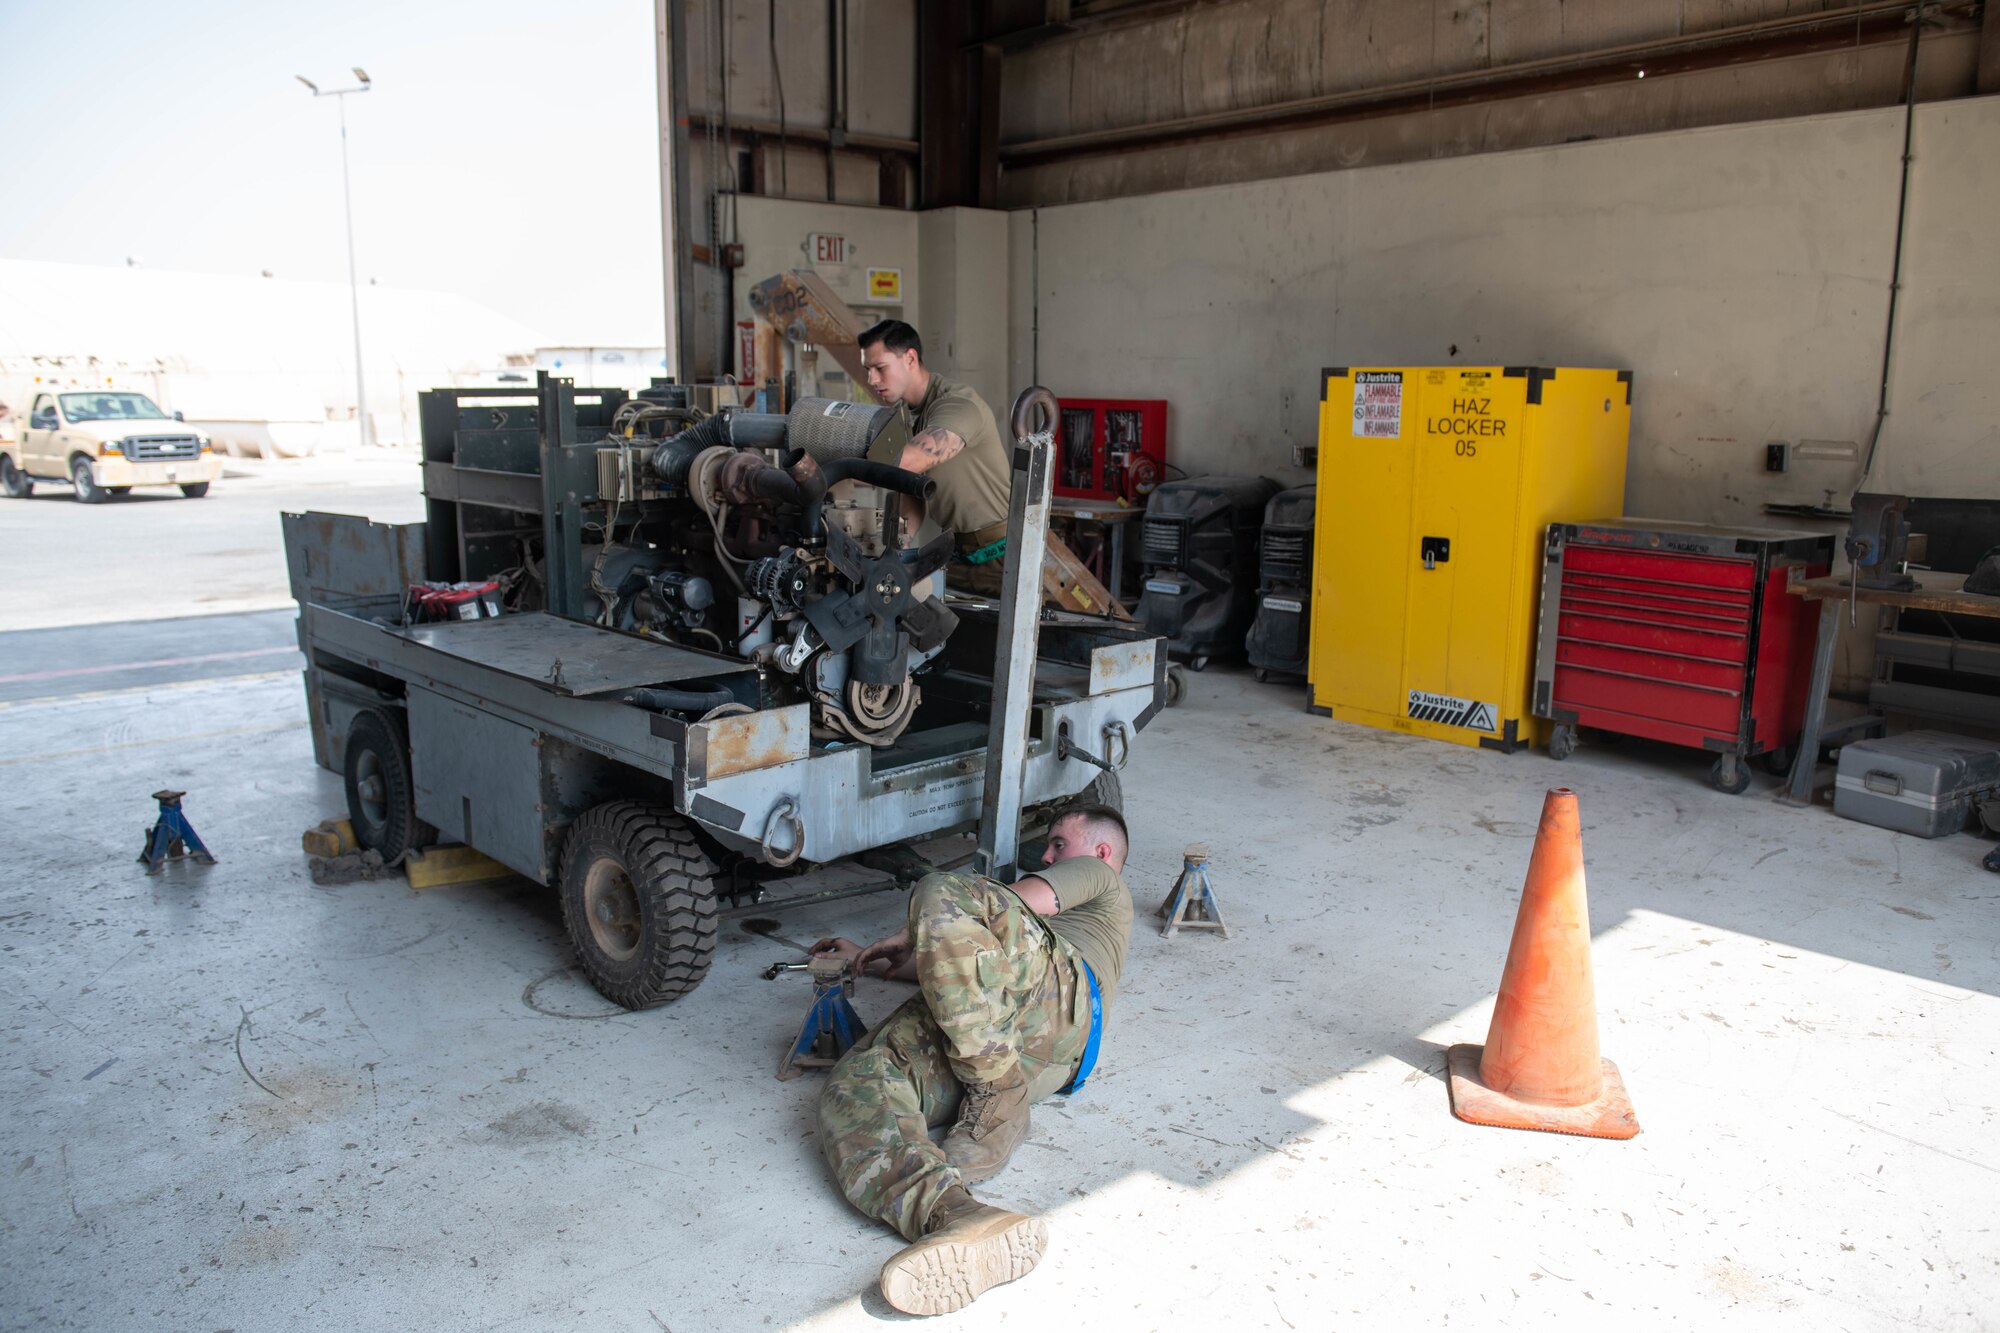 U.S. Air Force Staff Sgt. Jason Szurlej and U.S. Air Force Airman 1st Class Cameron Waters, 379th Air Expeditionary Wing Aerospace Ground Equipment Specialists, prepare to pull an engine from a generator on Al Udeid Air Base, Qatar, June 9, 2022. Generators power various important components on the flight line. (U.S. Air National Guard photo by Airman 1st Class Constantine Bambakidis)